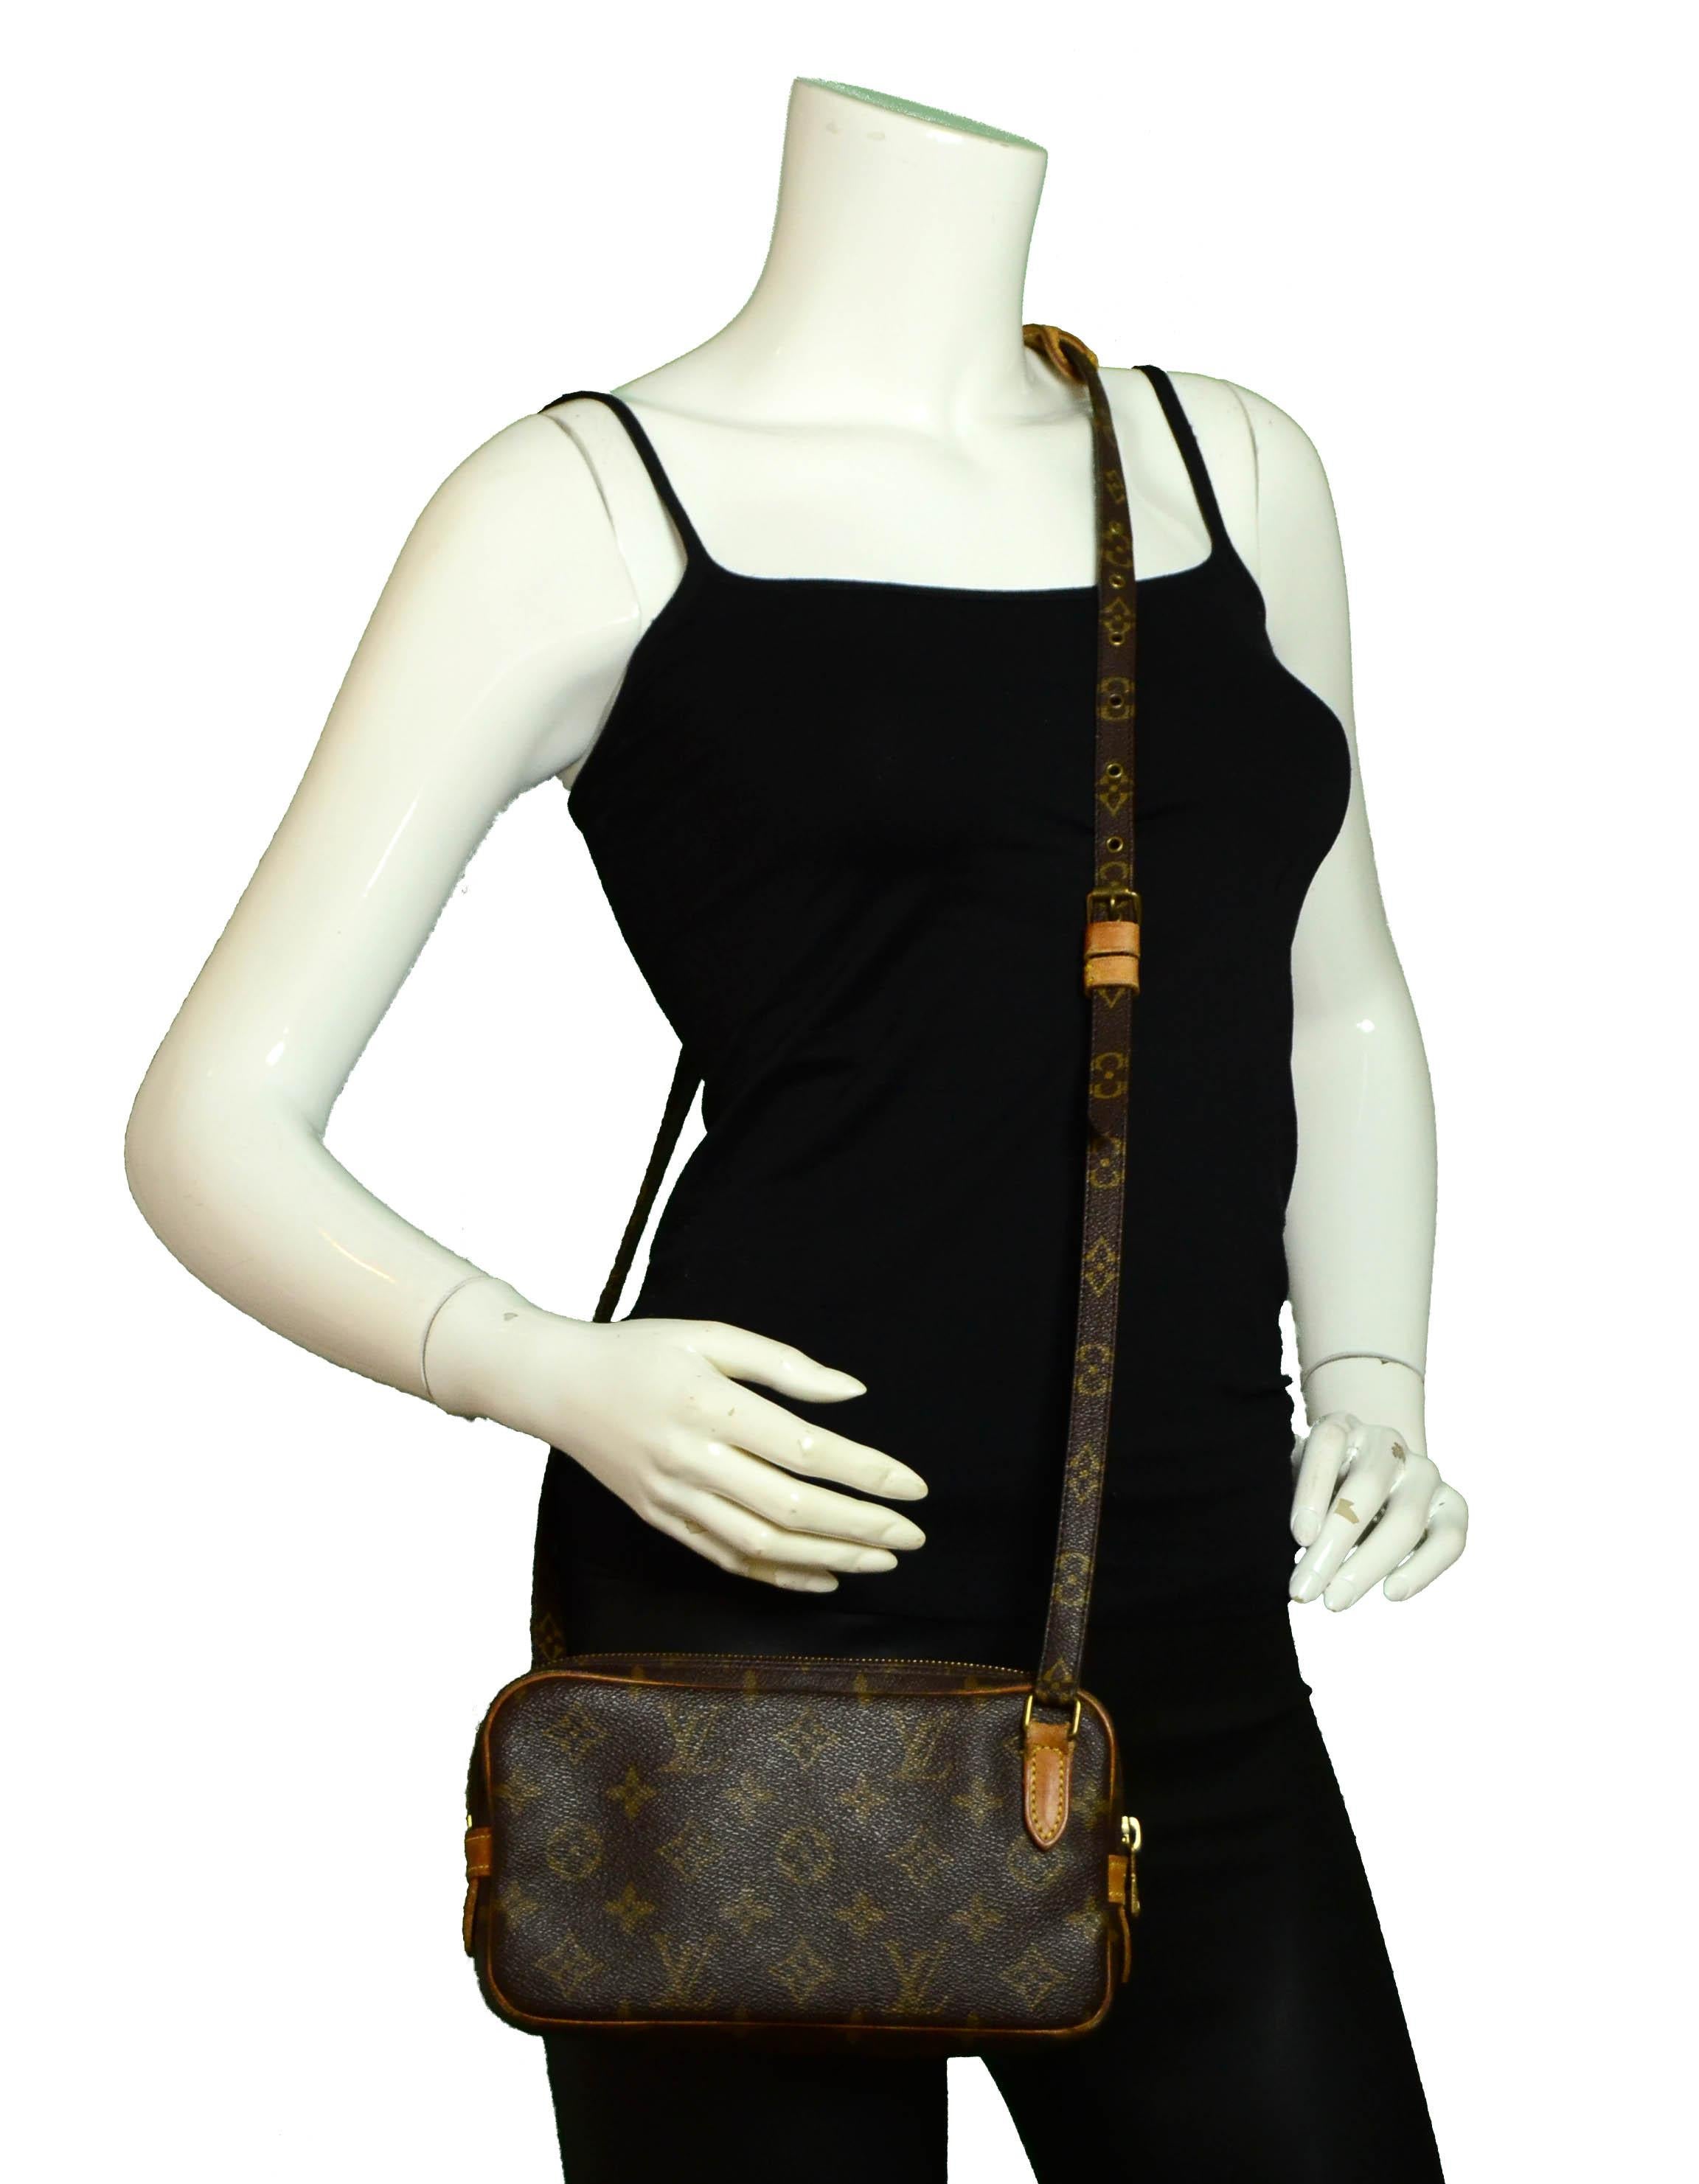 Louis Vuitton Monogram Marly Bandouliere Crossbody Bag

Made In: France
Year of Production: 1992
Color: Brown monogram
Hardware: Goldtone
Materials: Coated canvas & vachetta leather
Lining: Brown leather
Closure/Opening: Zipper
Exterior Condition: